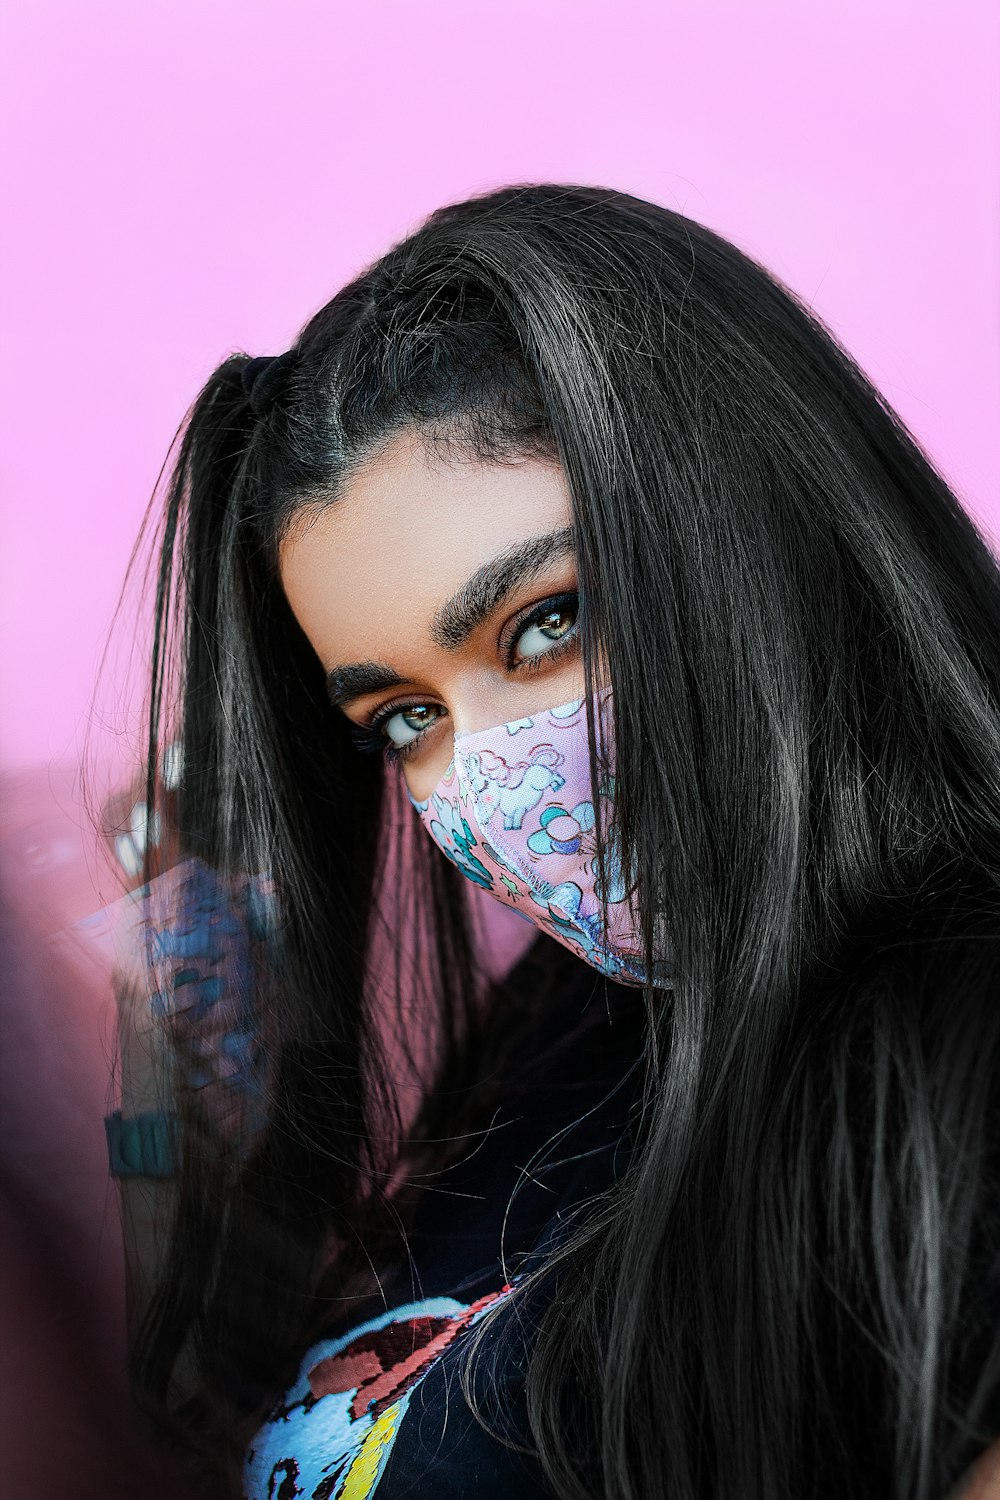 1500+ Girl In The Mask Pictures | Download Free Images on Unsplash